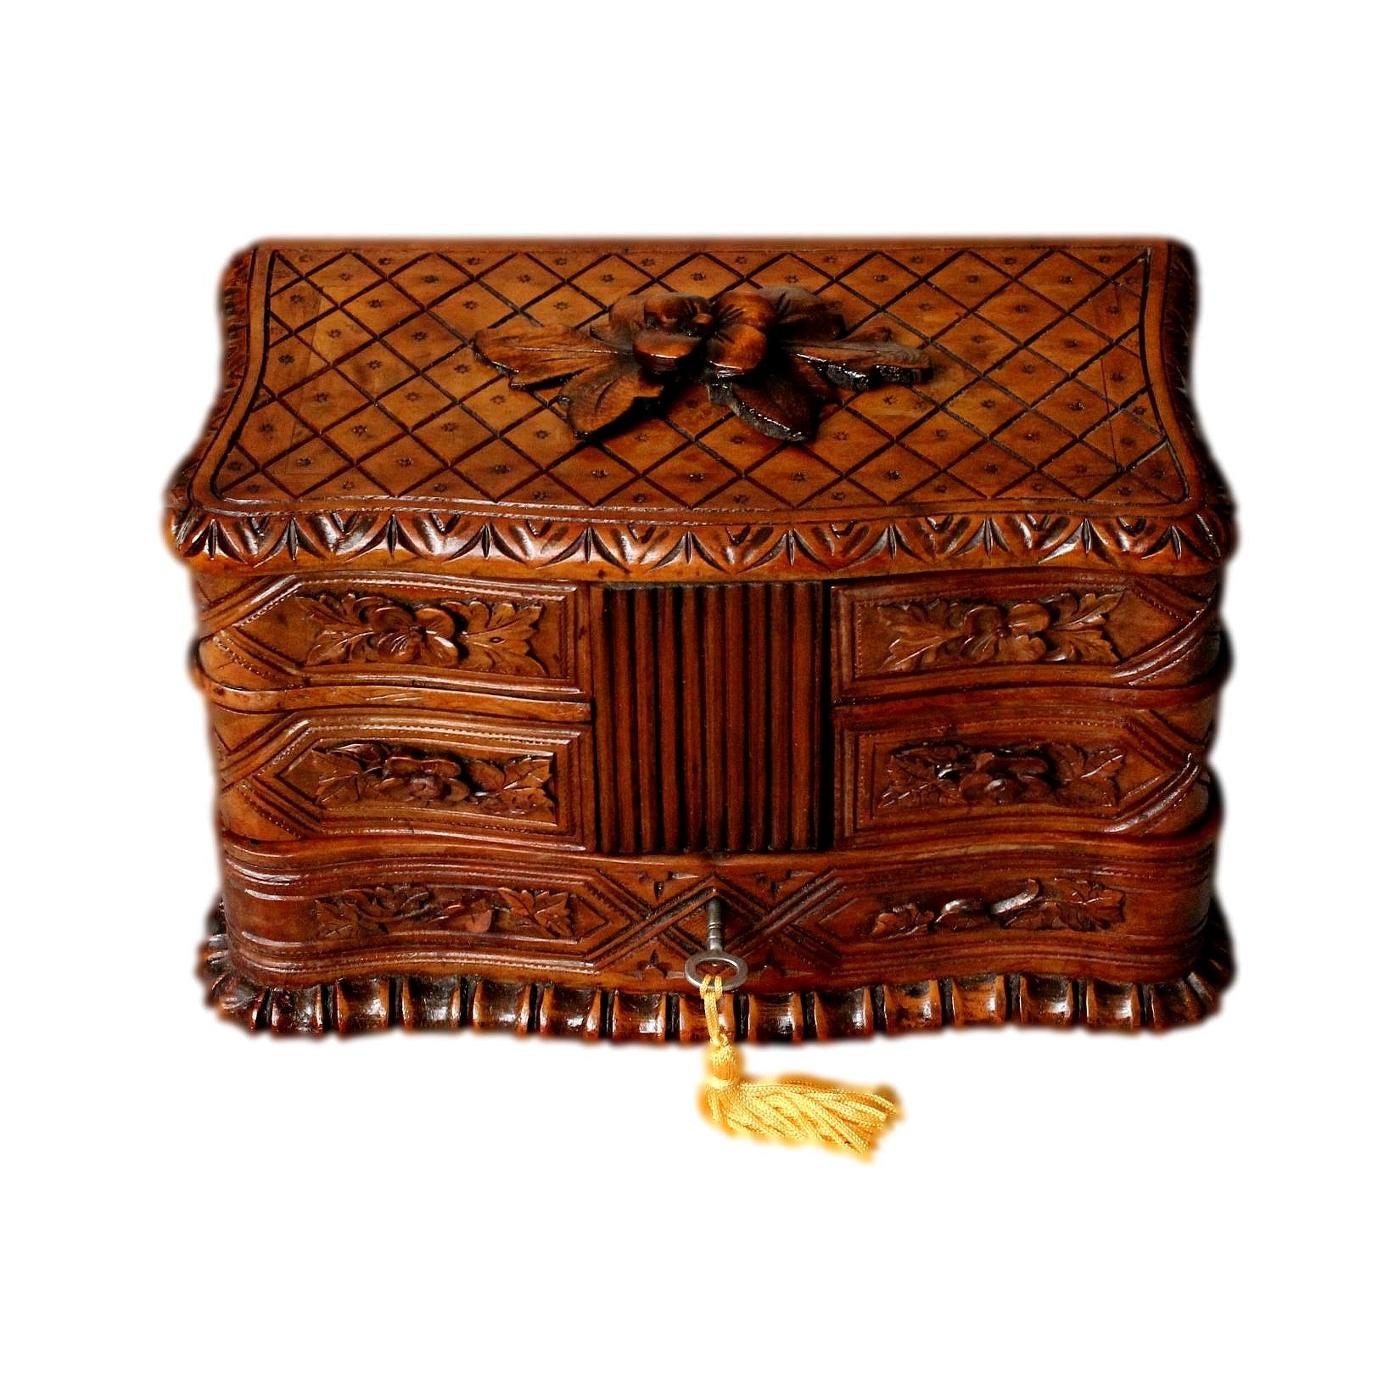 Superb Antique Jewellery Box From The Black Forest